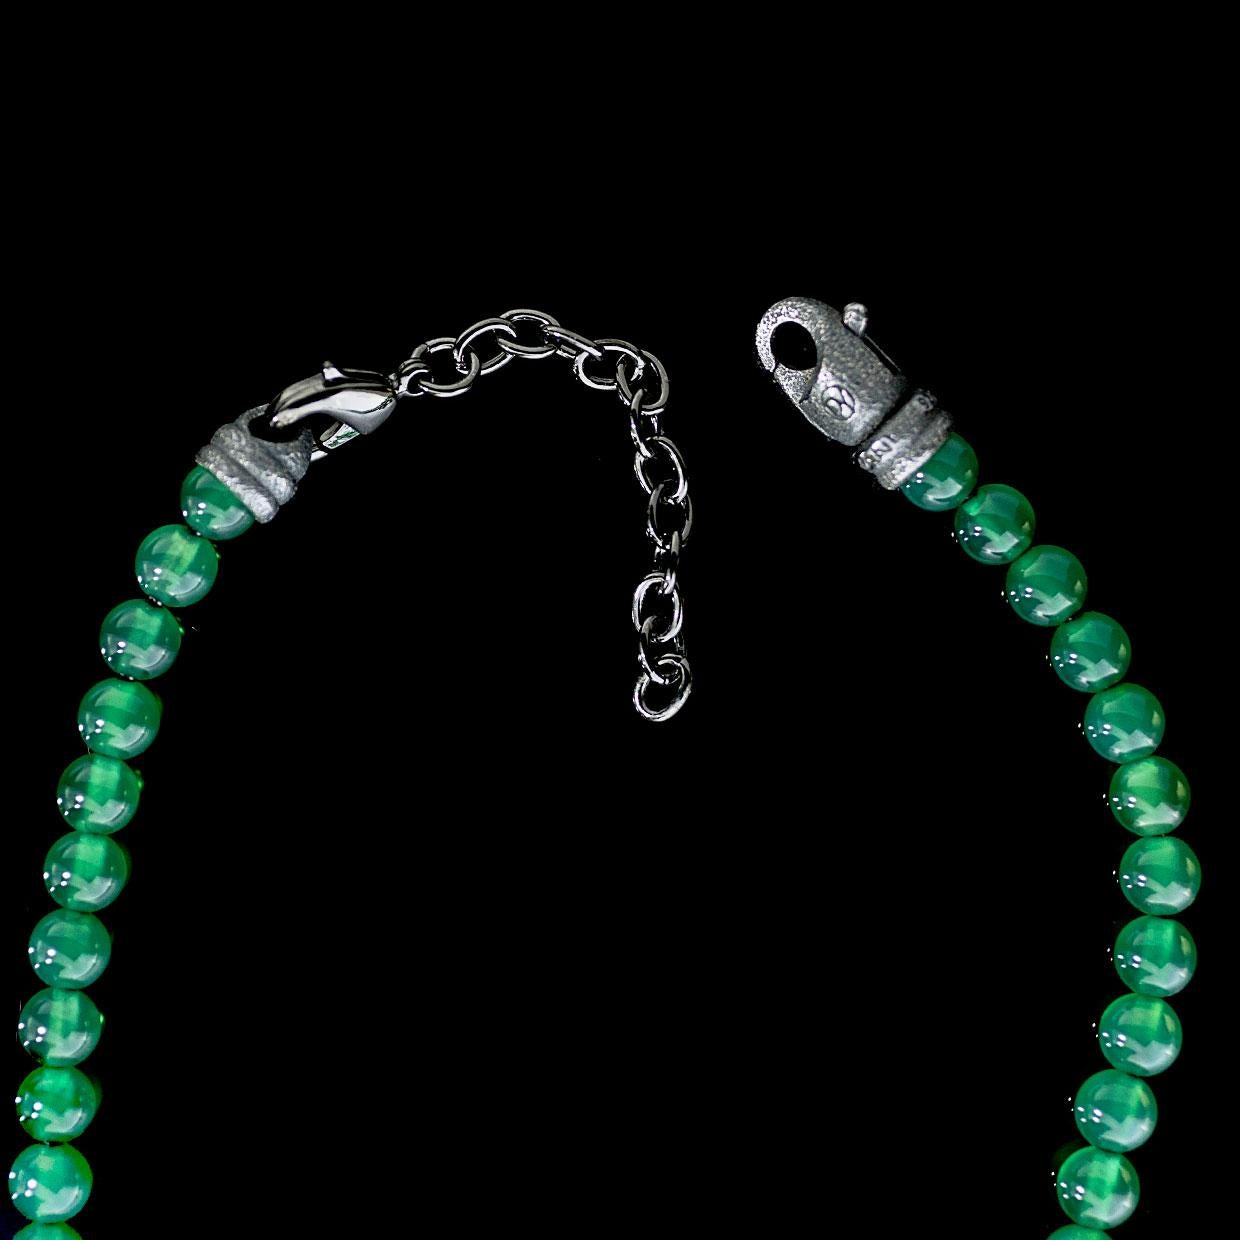 green onyx beads necklace